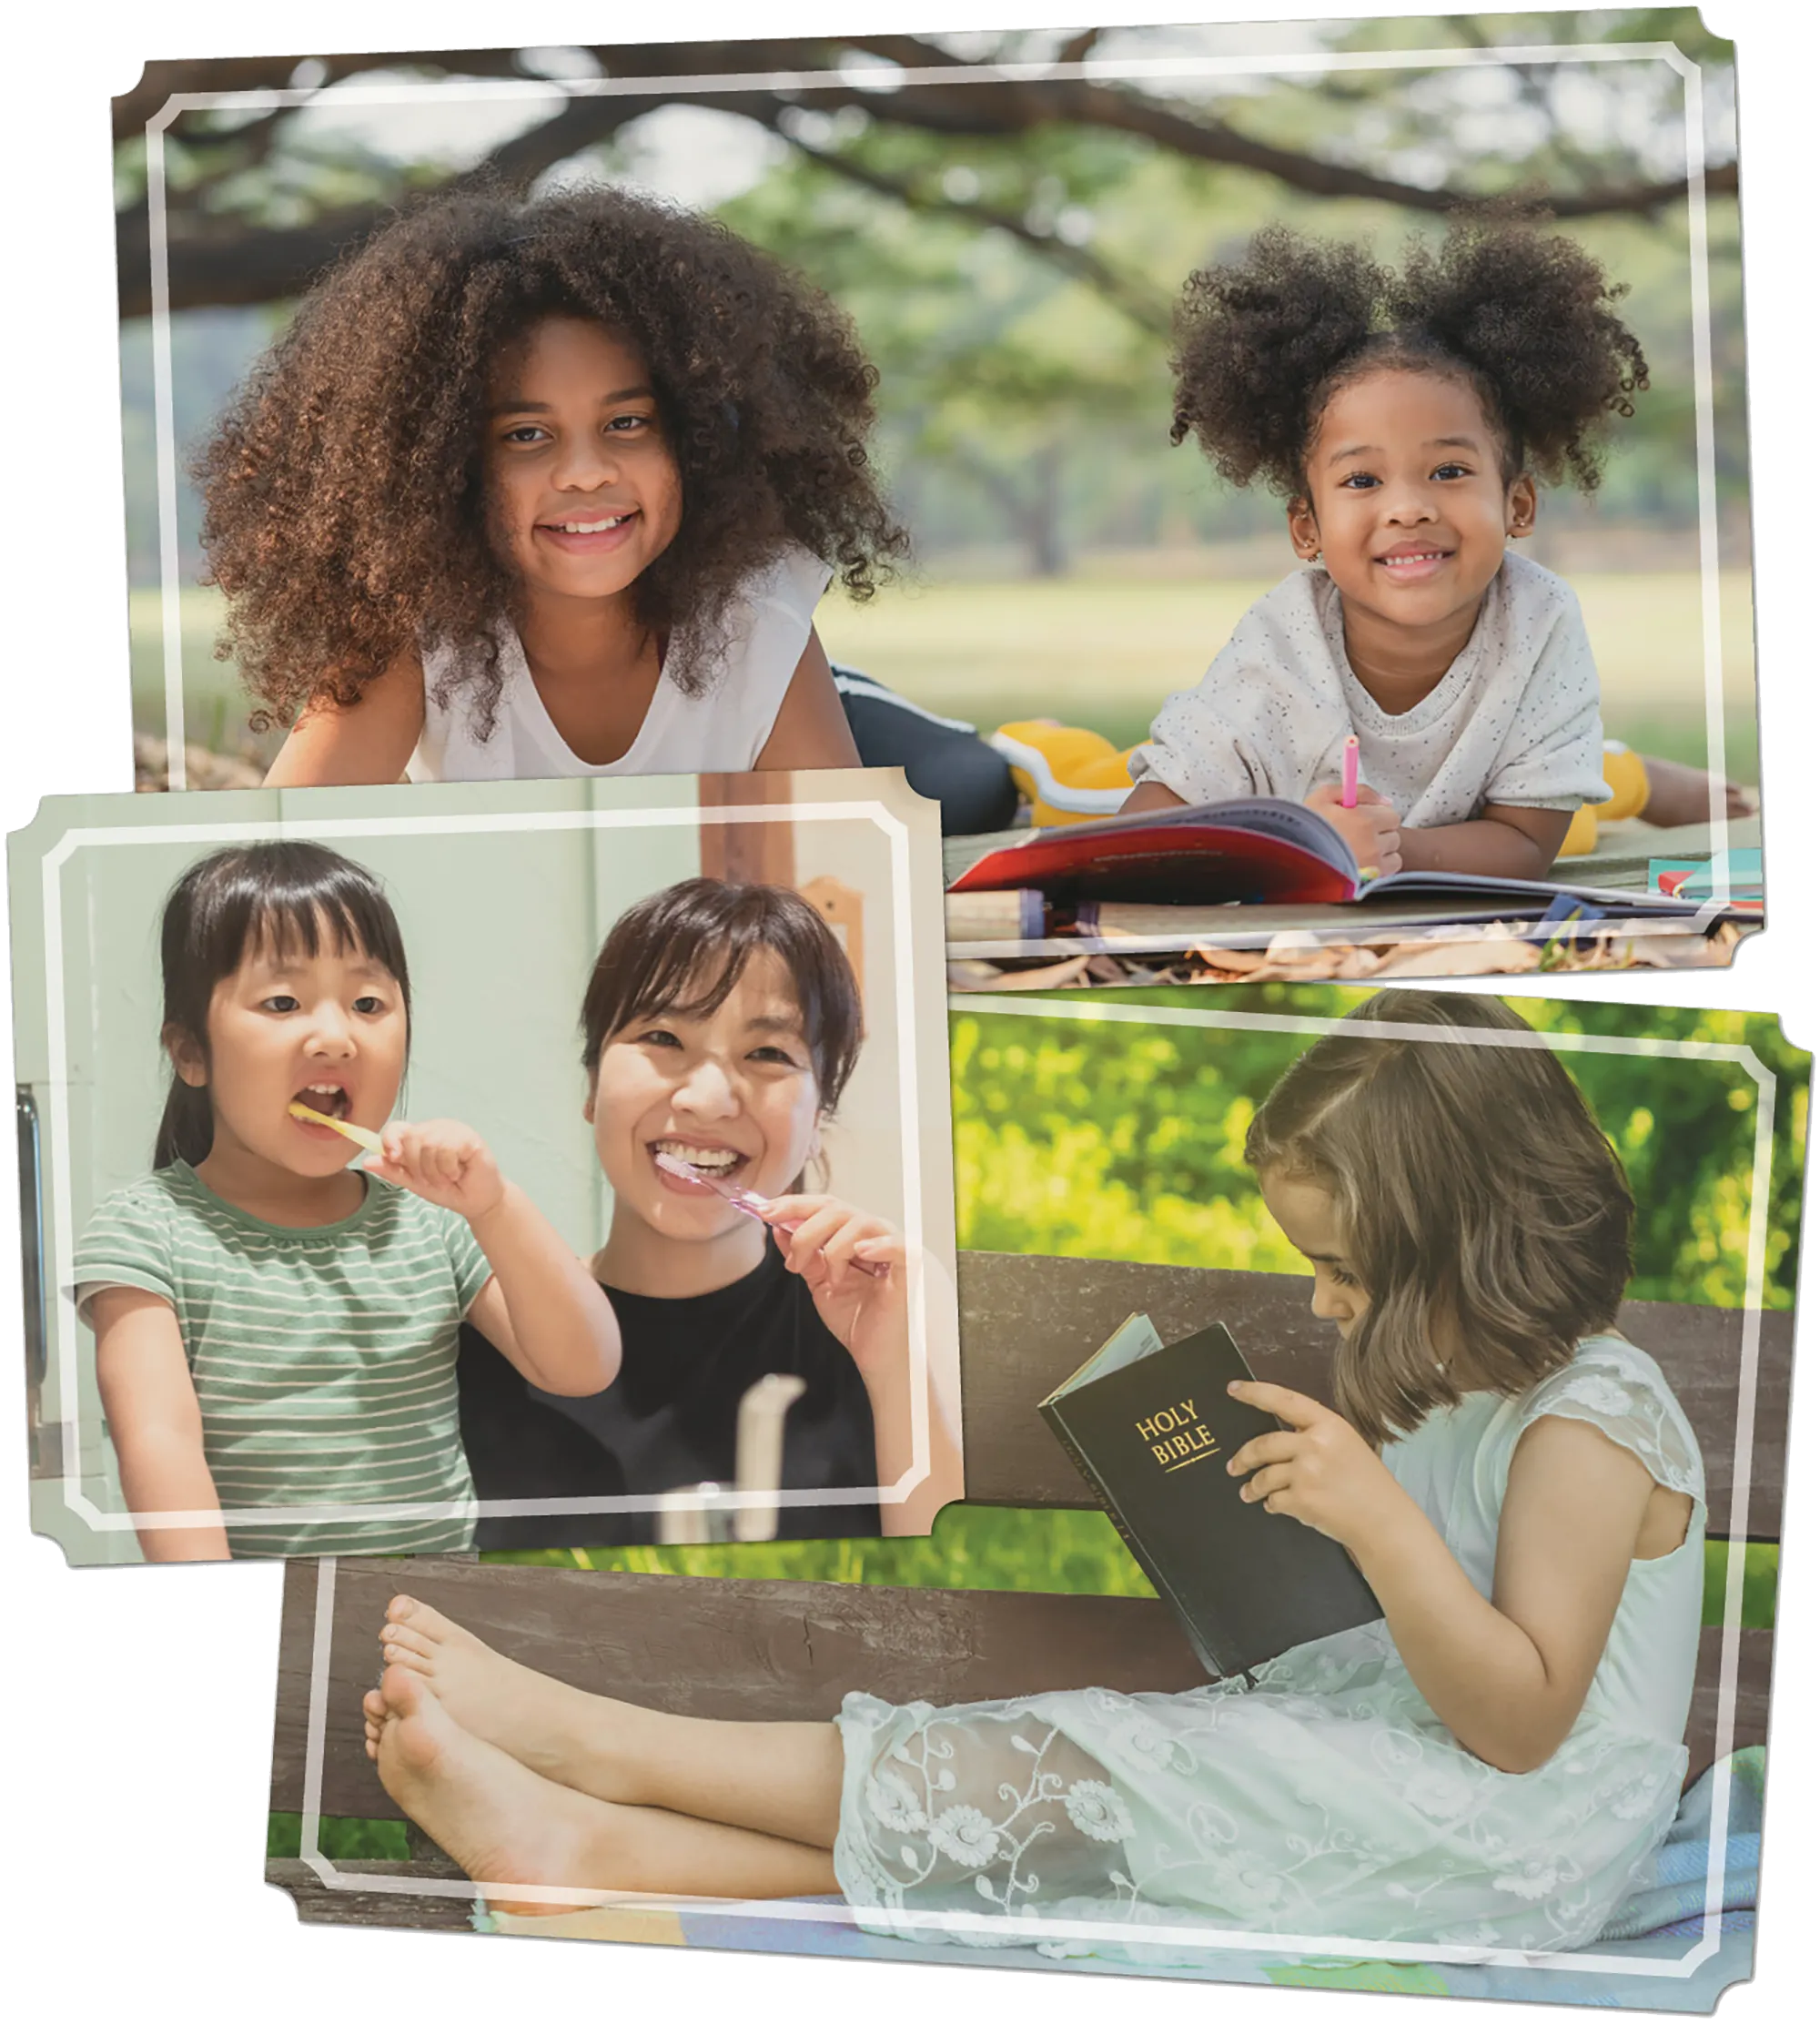 3 pictures: top picture features two girls smiling, middle picture features two girls brushing their teeth, and bottom picture features little girl reading the bible